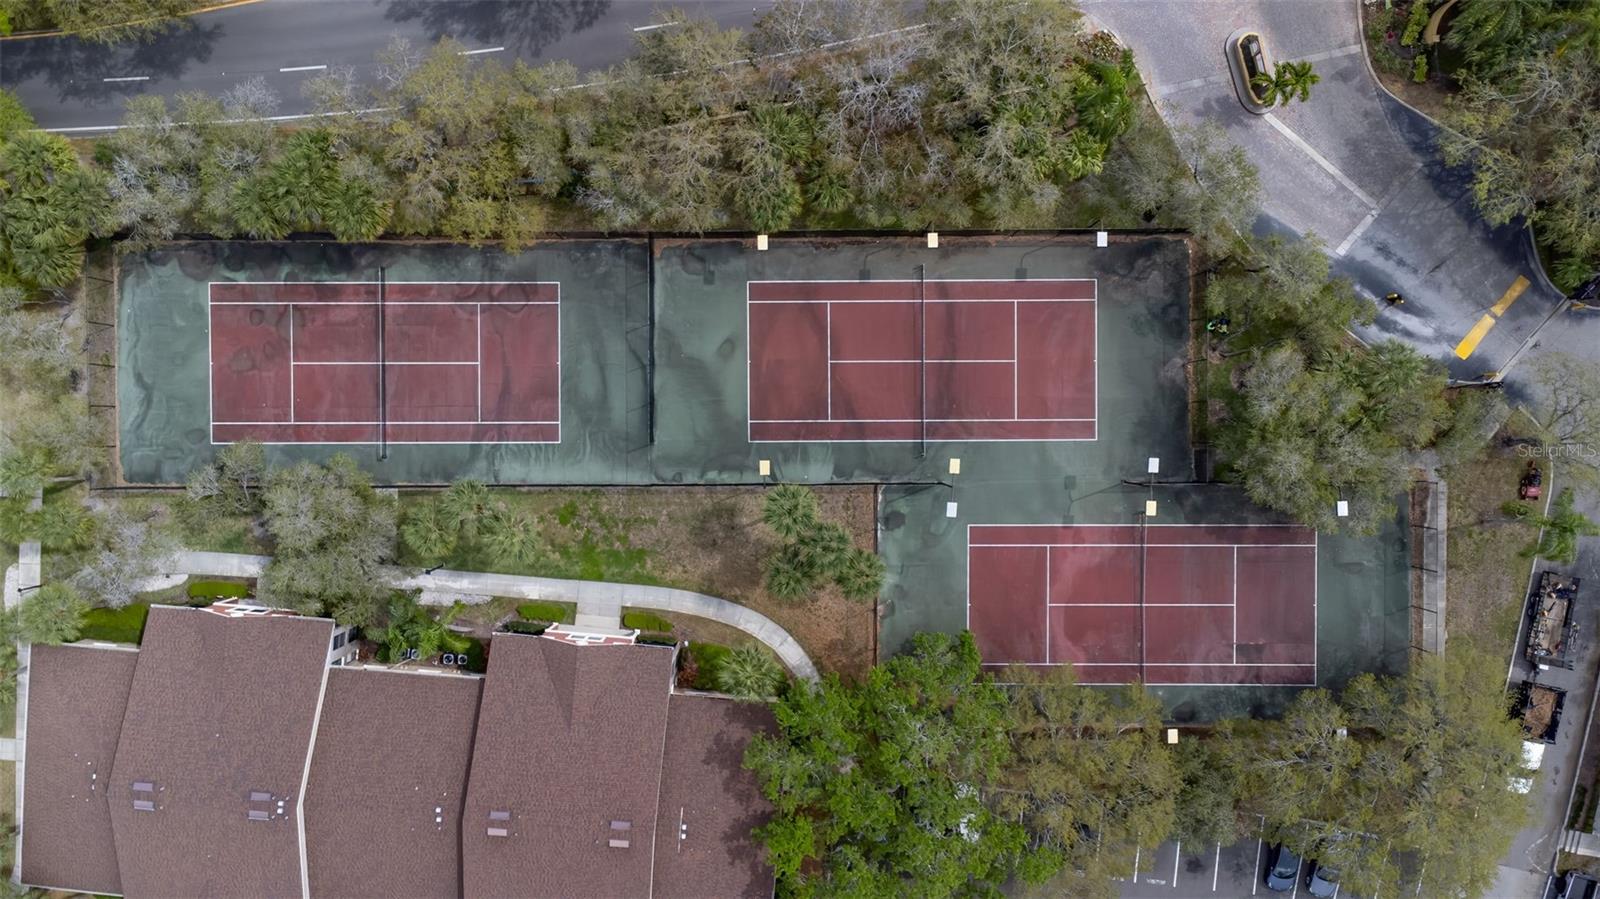 Tennis Courts. Game anyone!